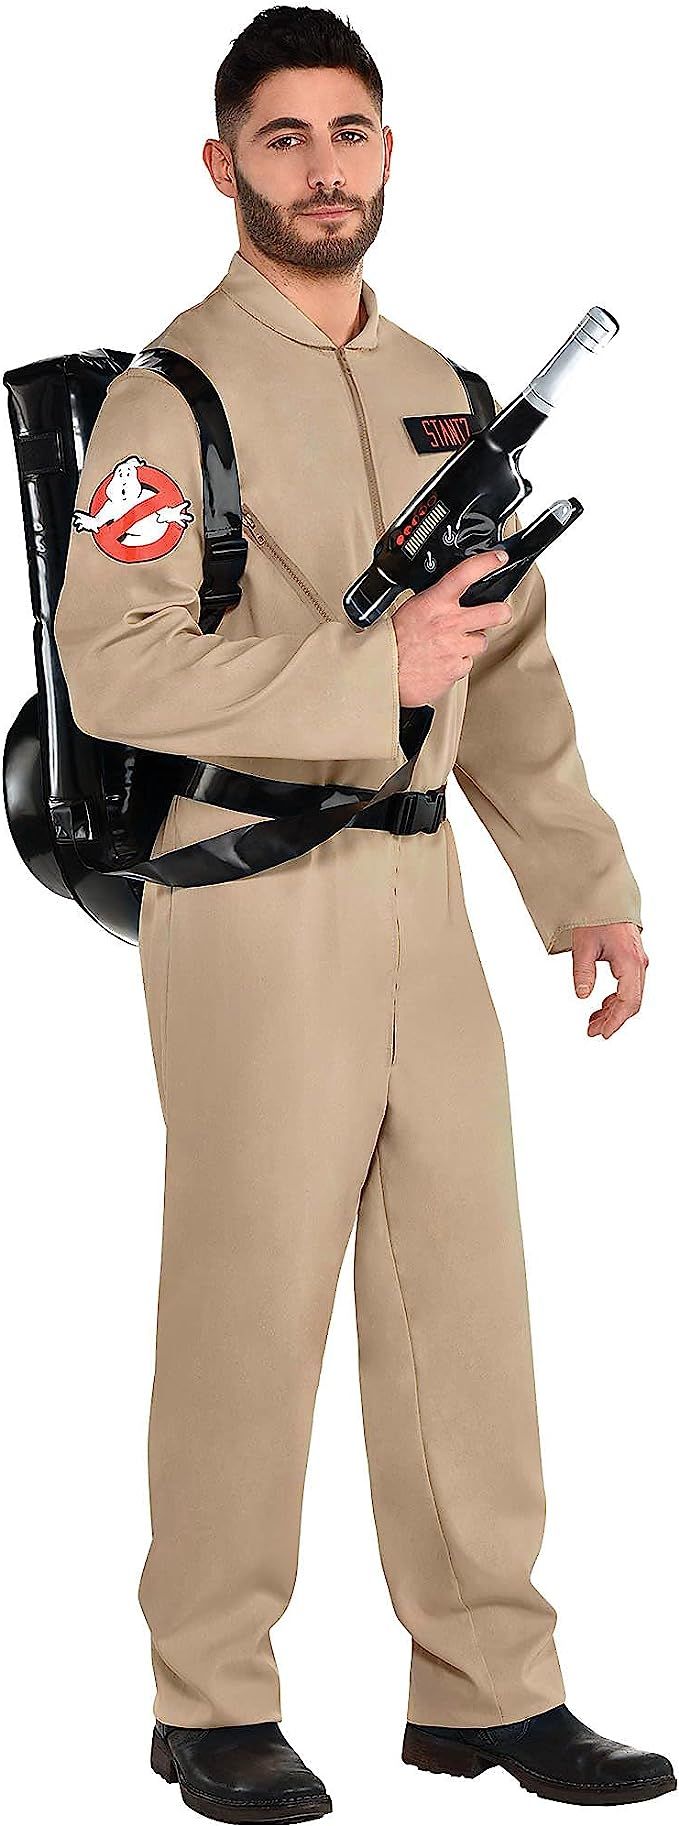 Party City Ghostbusters Halloween Costume with Proton Pack for Adults, Standard Size, with Jumpsu... | Amazon (US)